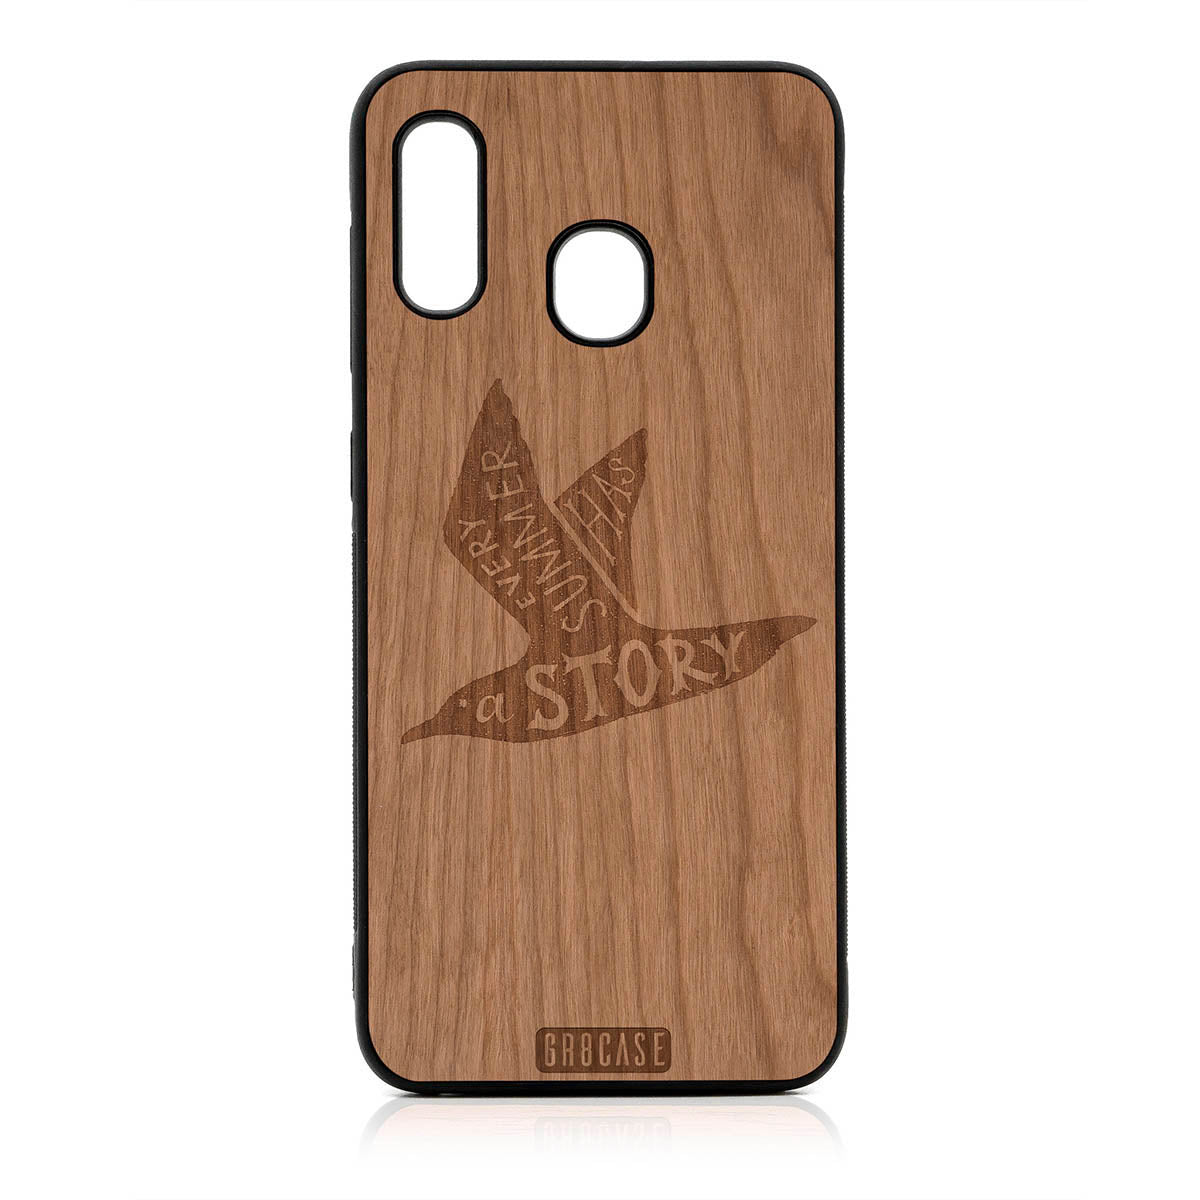 Every Summer Has A Story (Seagull) Design Wood Case For Samsung Galaxy A20